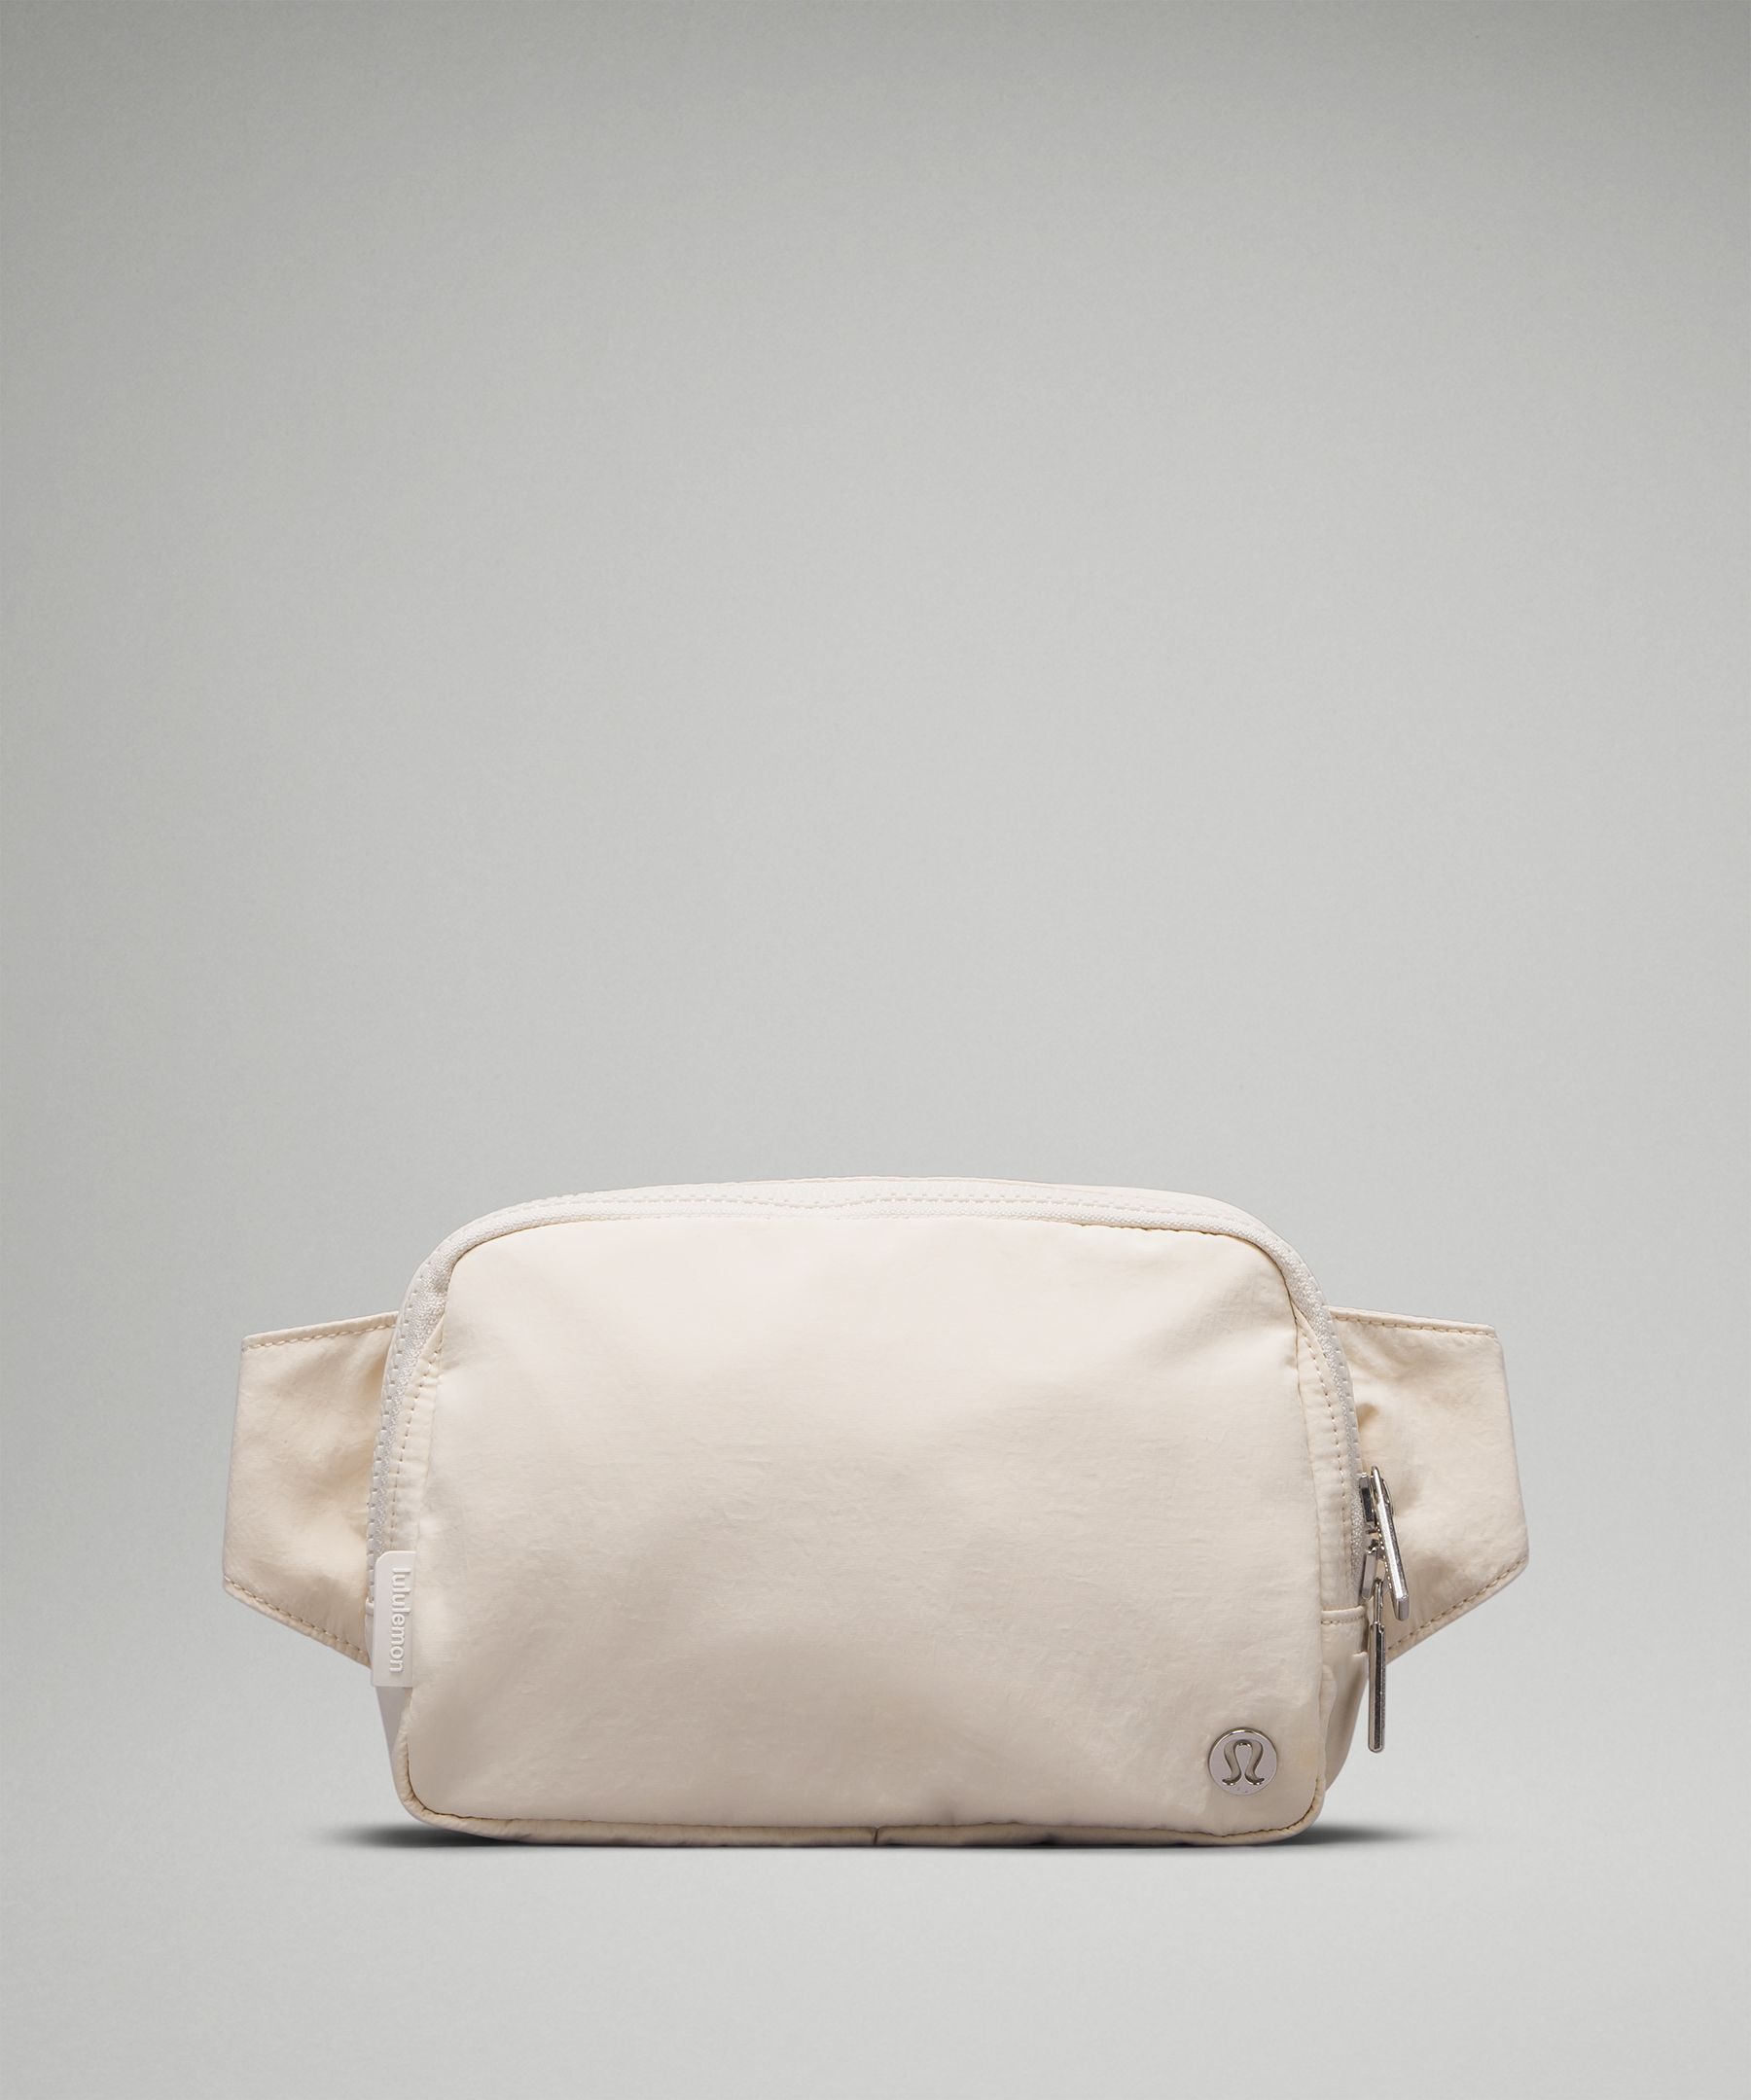 Stay Fashionable this Spring with Lululemon's Belt Bag